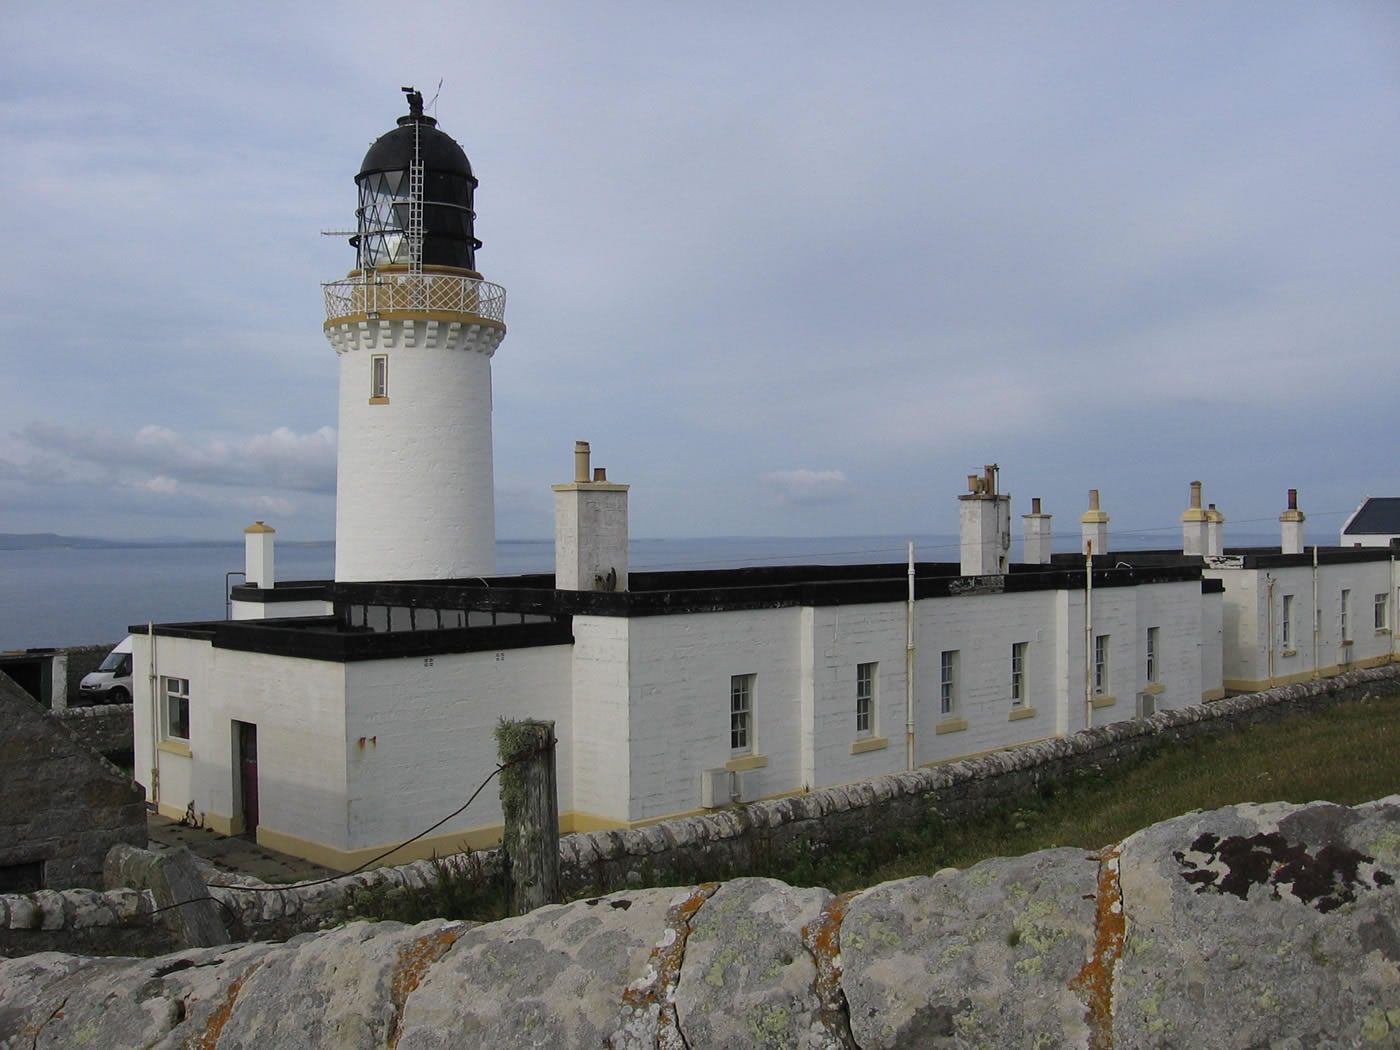 Dunnet Head Lighthouses and buildings